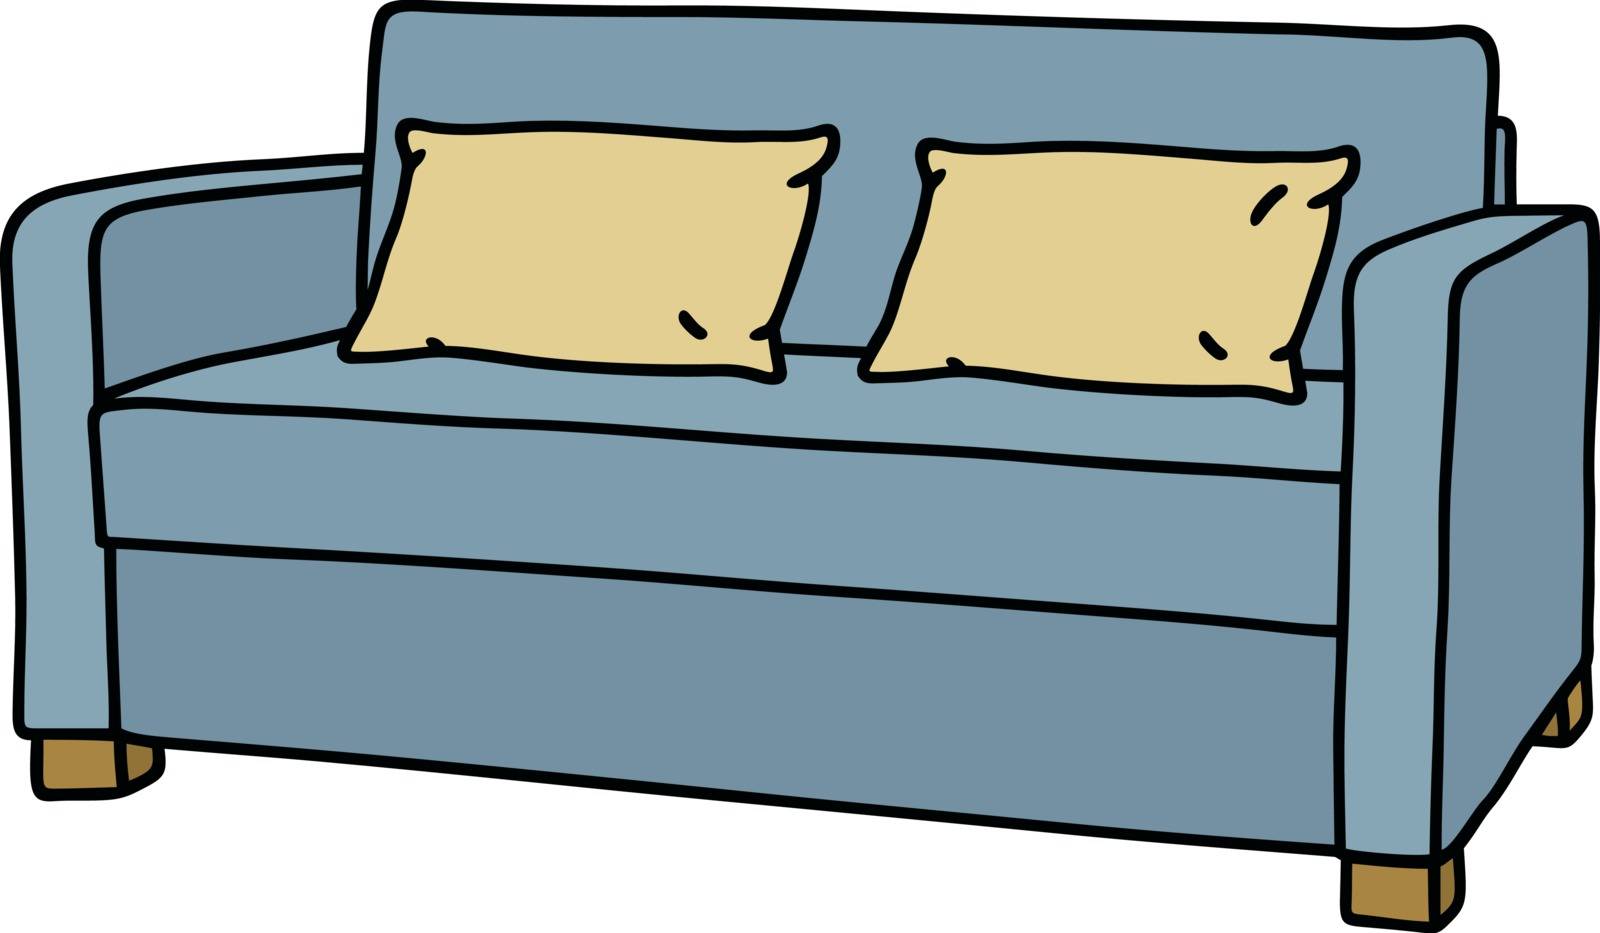 Hand drawing of a blue couch with two cream pillows